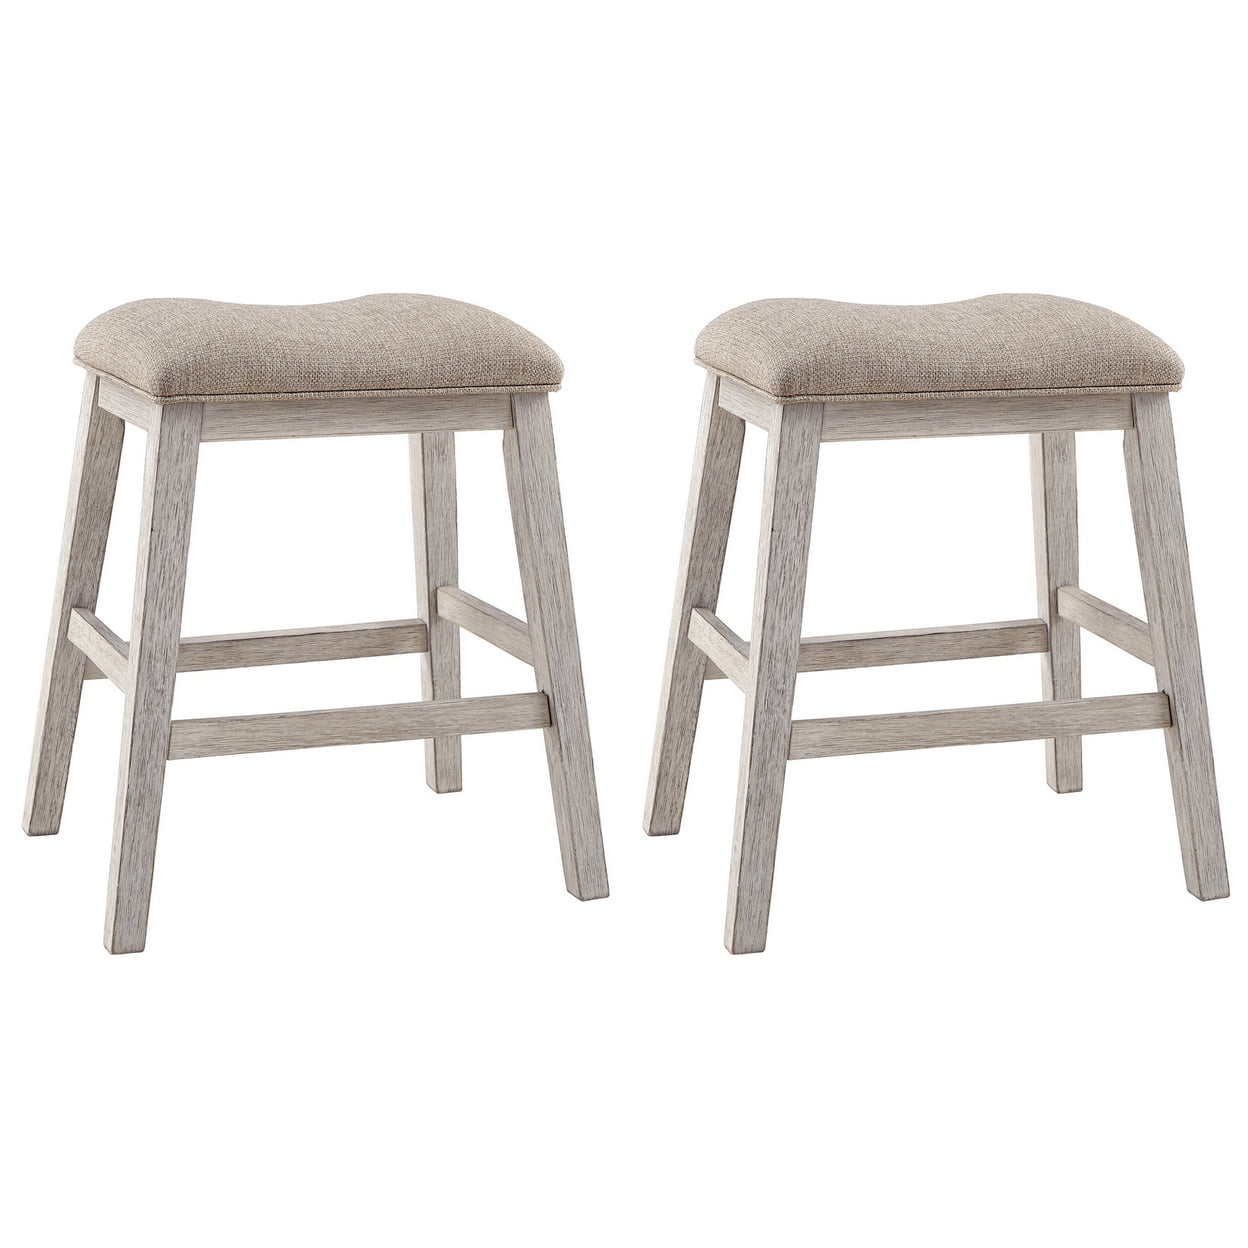 Picture of Benjara BM238393 Fabric Upholstered Stool with Angled Legs, Beige - Set of 2